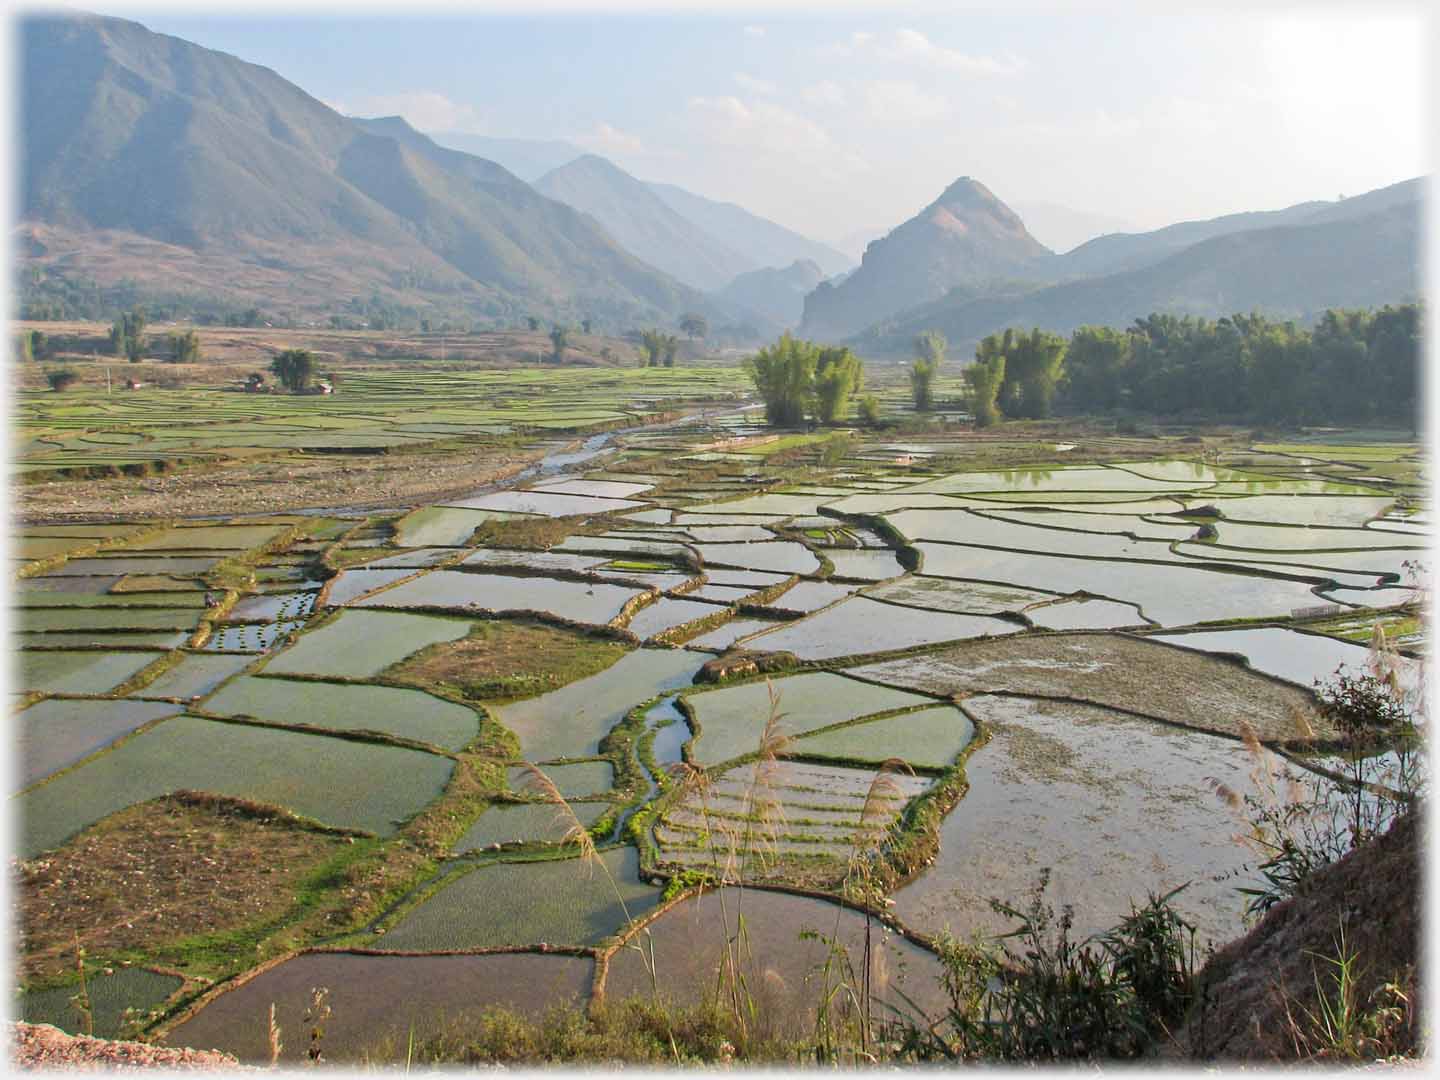 Pattern of fields, near ones under water, bamboos and mountains.